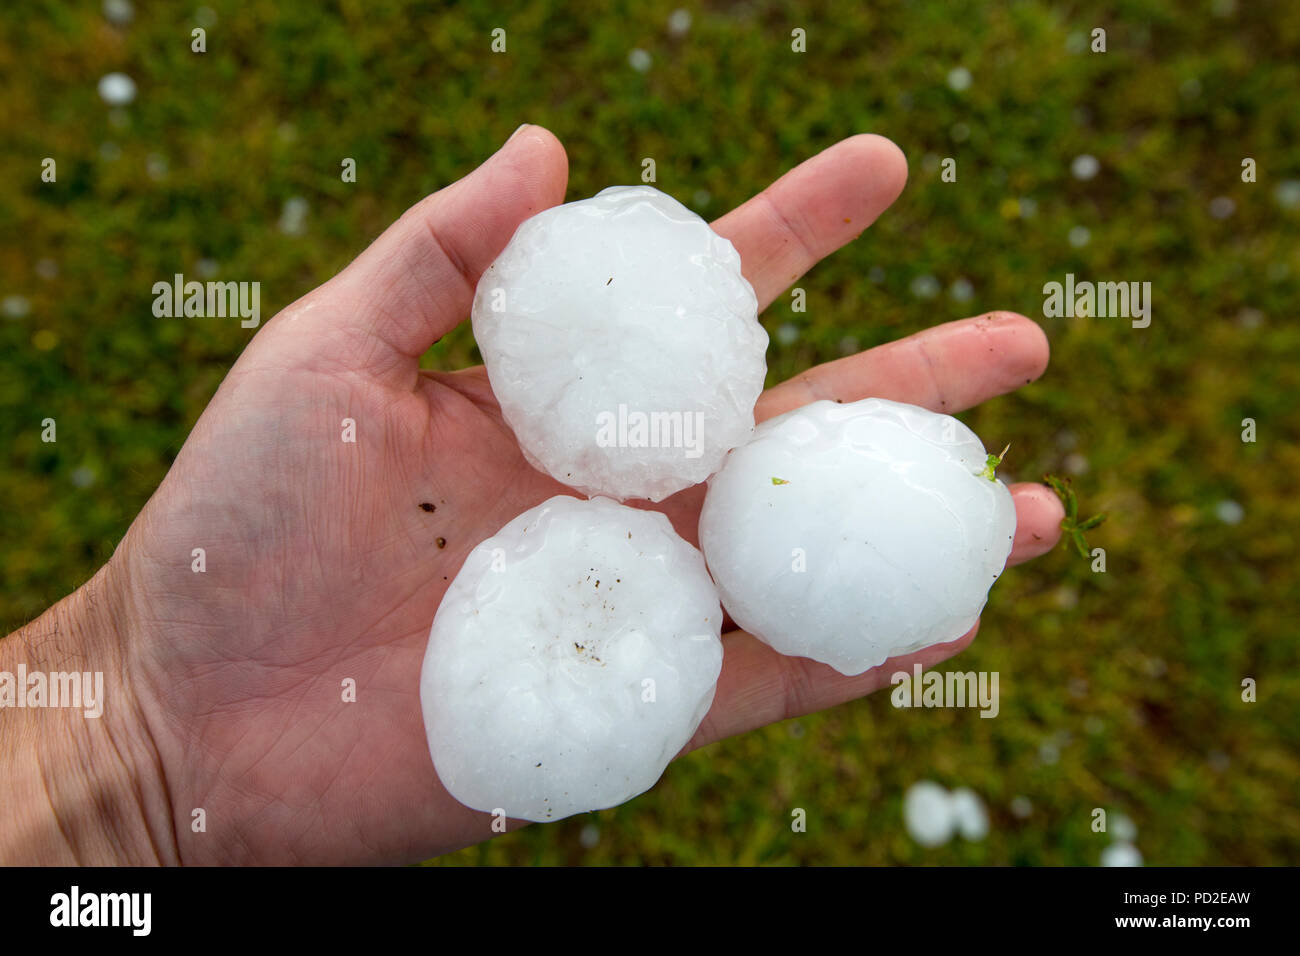 how big do hailstones get and what determines the size of hailstones during a thunderstorm